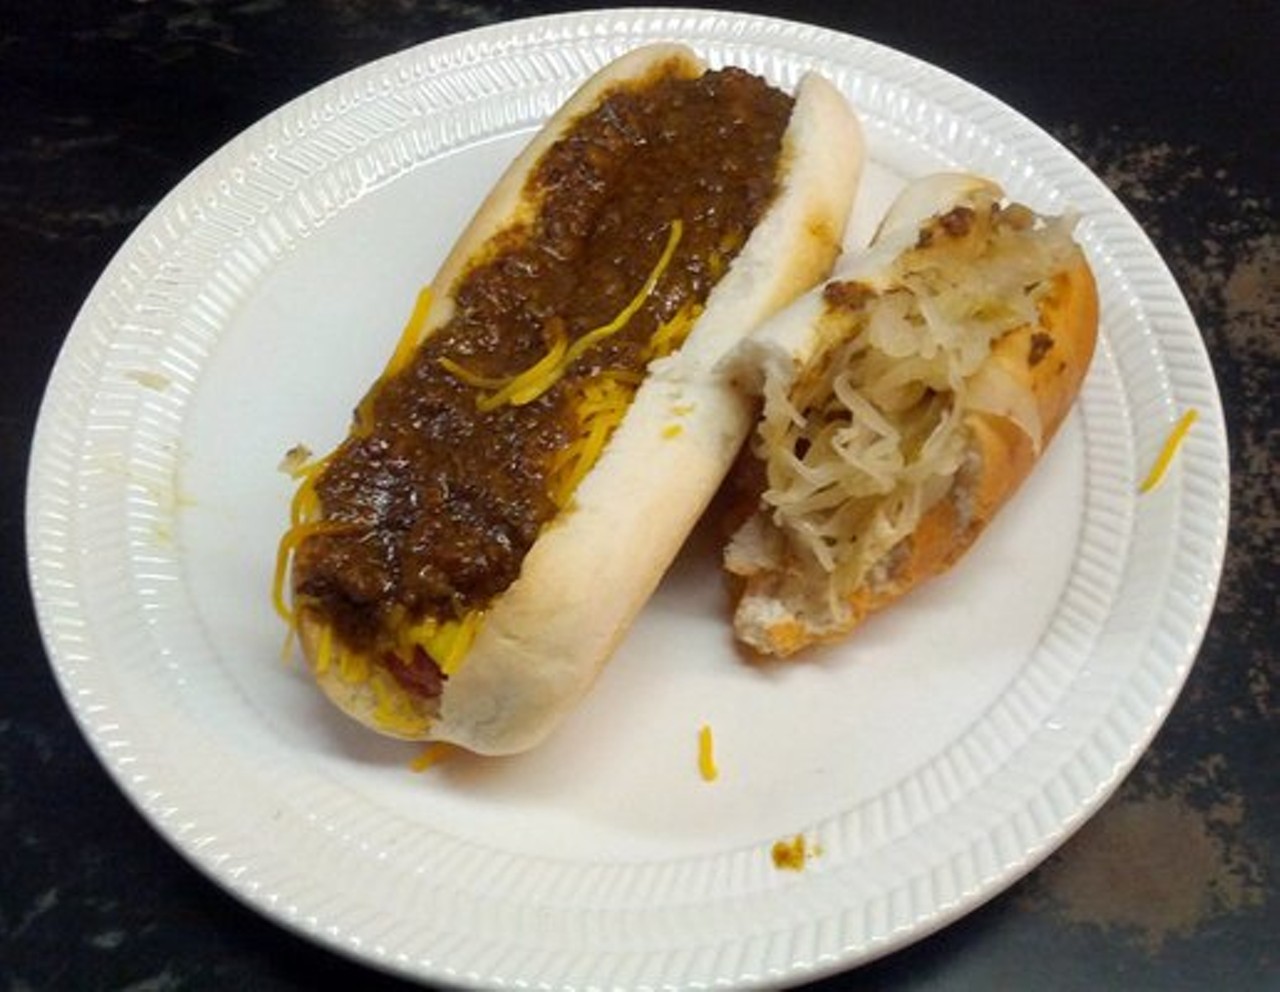 Open til 3am on Friday and Saturday nights, The Hot Dog Inn on Lorain Rd. in Cleveland is so diverse at 1 a.m. that you feel like you are at Ellis Island. That is of course if Ellis Island had a bar in it. Old Fashioned Hot Dog Inn is located at 4008 Lorain Ave. Call 216-631-4460 for more information.